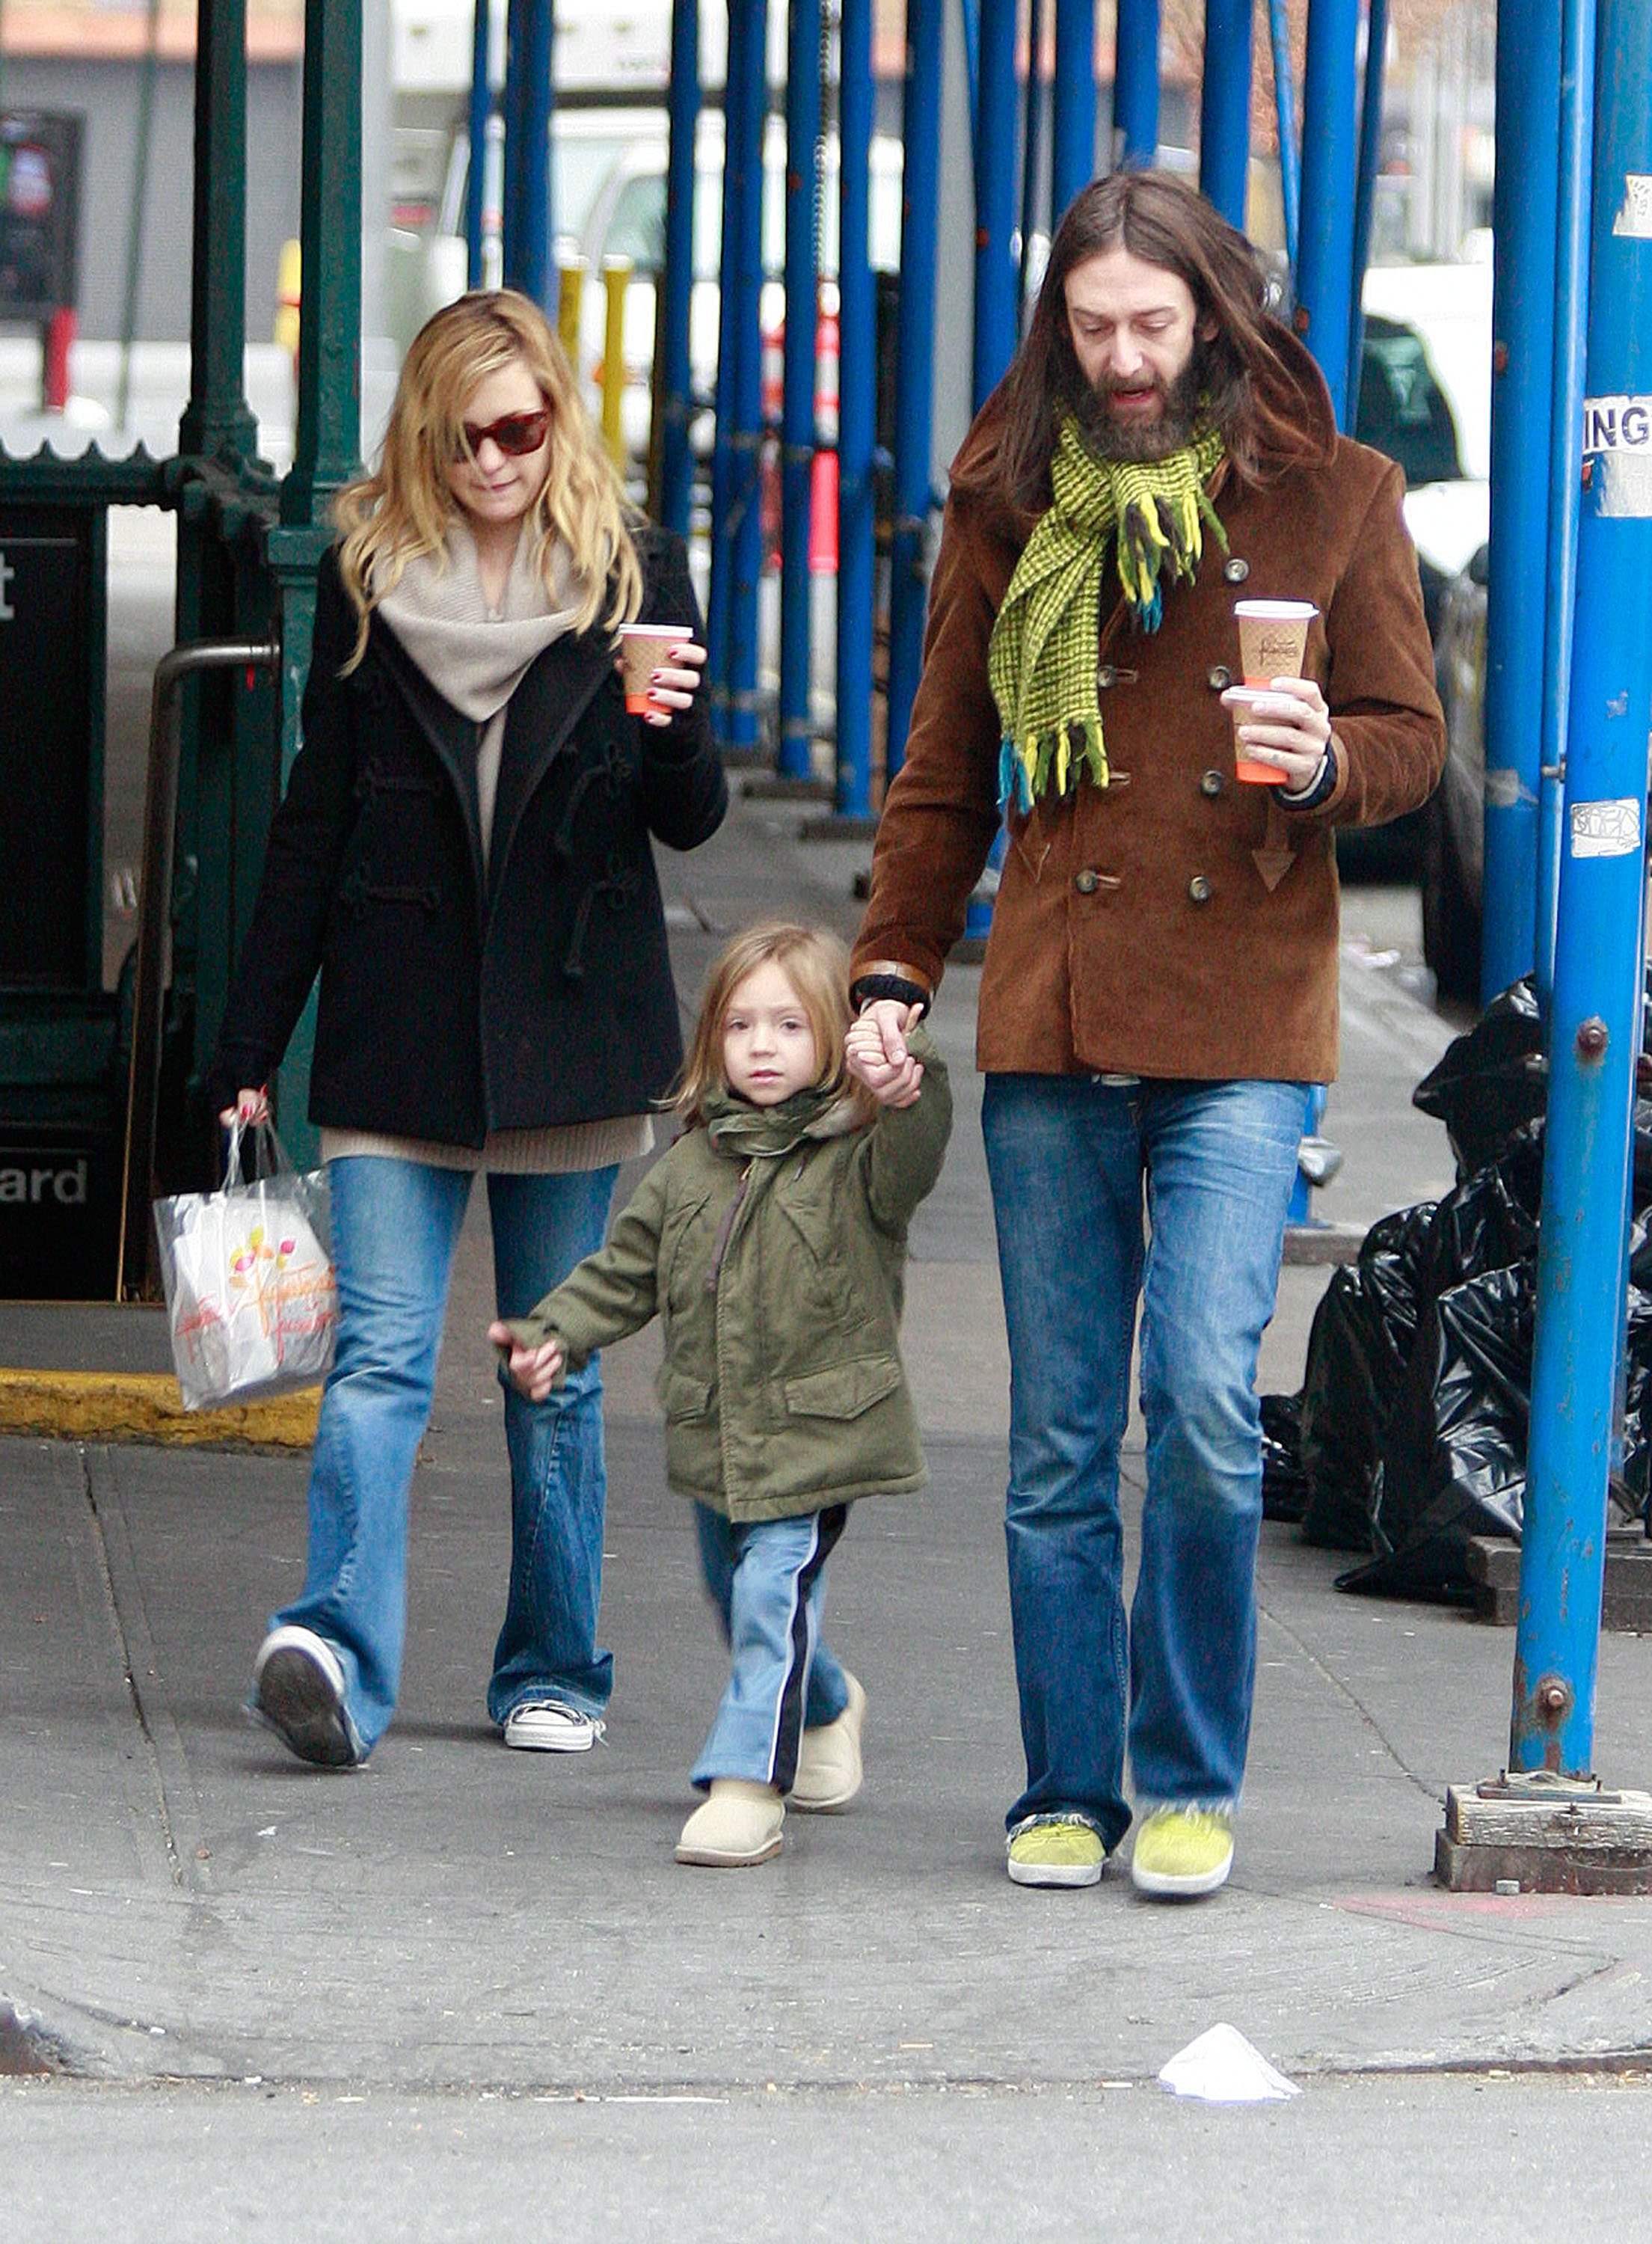 Kate Hudson and her ex-husband Chris Robinson pictured walking with their son Ryder Robinson in SOHO on December 9 2007 in New York City, New York.  / Source: Getty Images